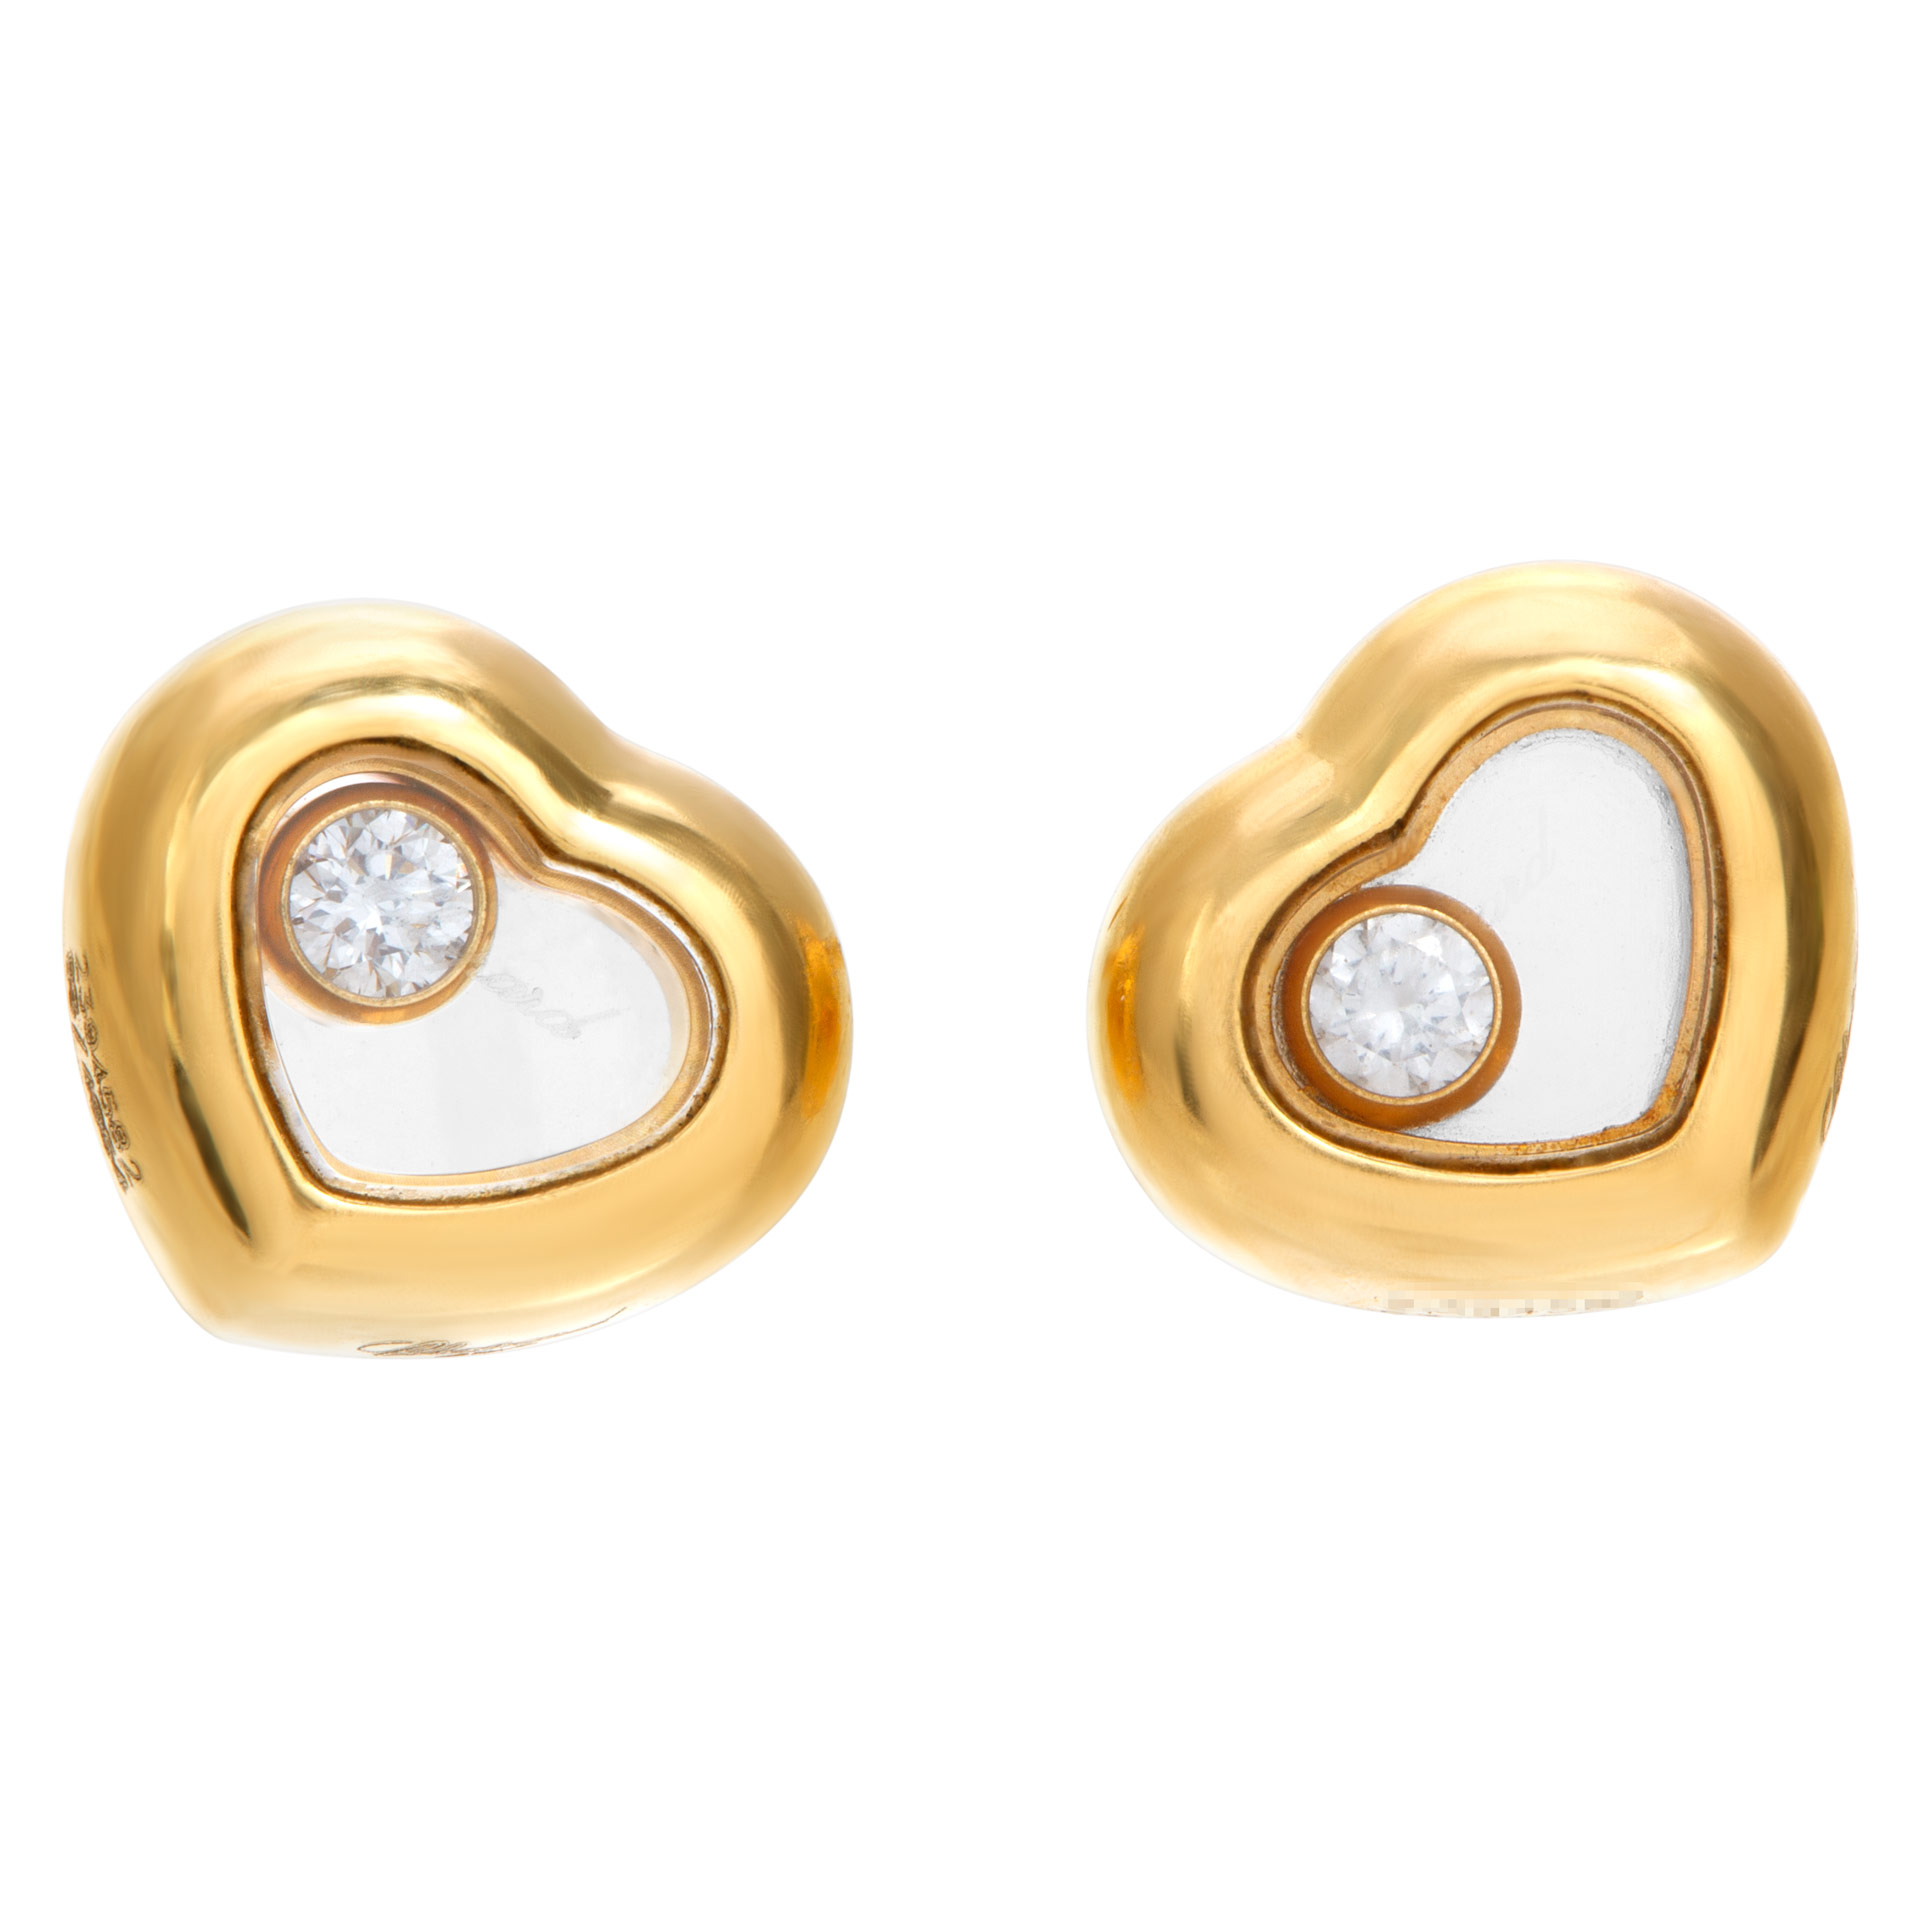 Chopard Icon earrings in 18k with single floating diamonds image 1